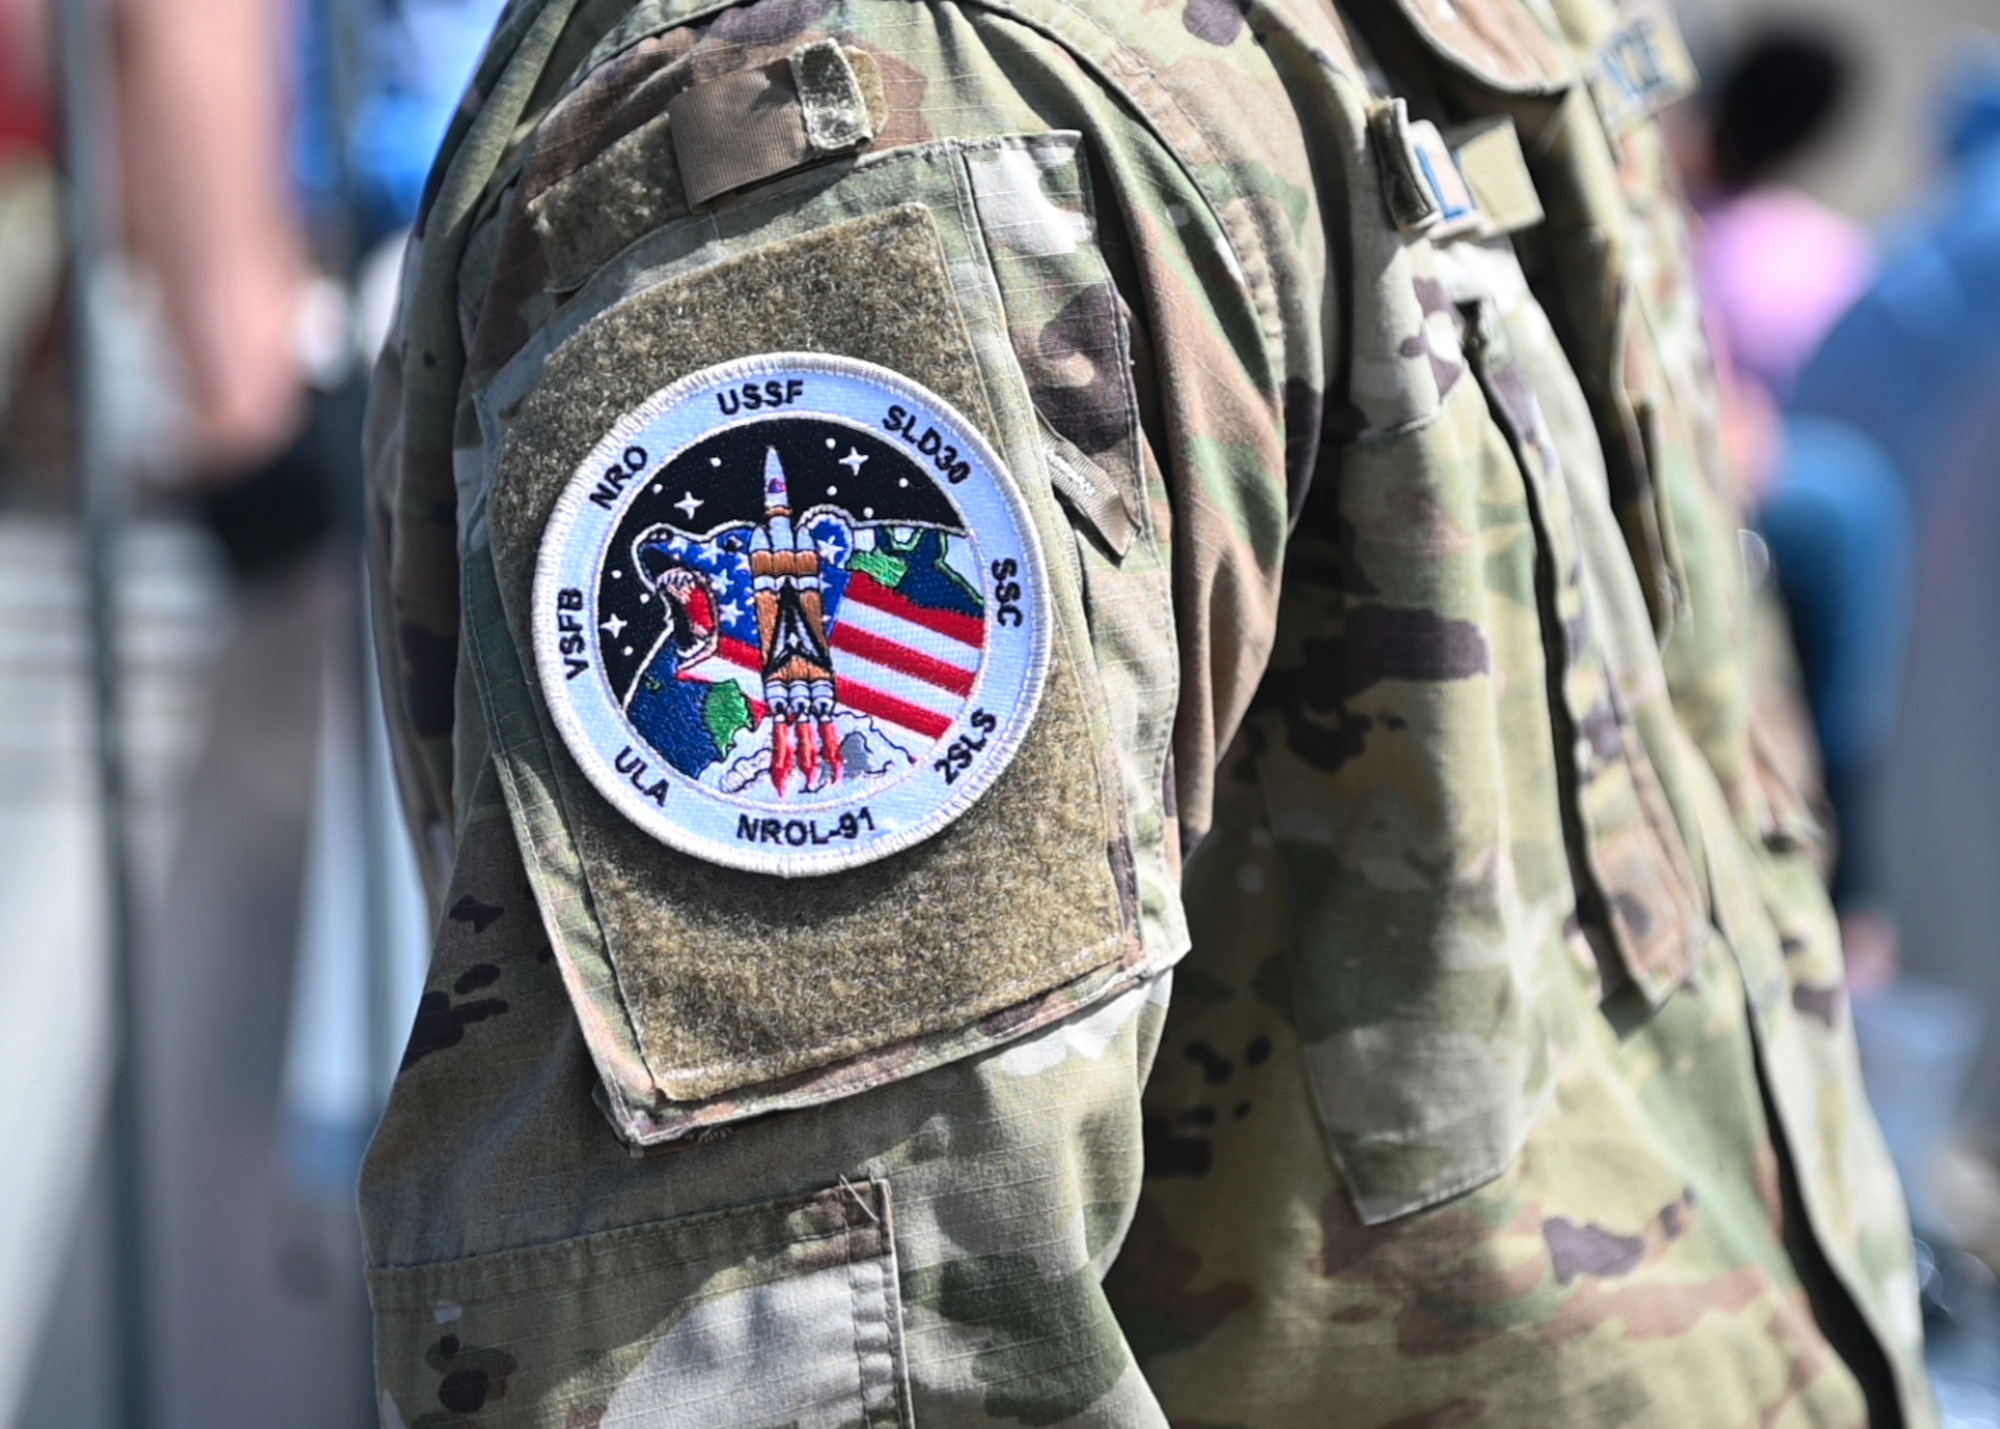 A Velcro launch patch on the persons shoulder